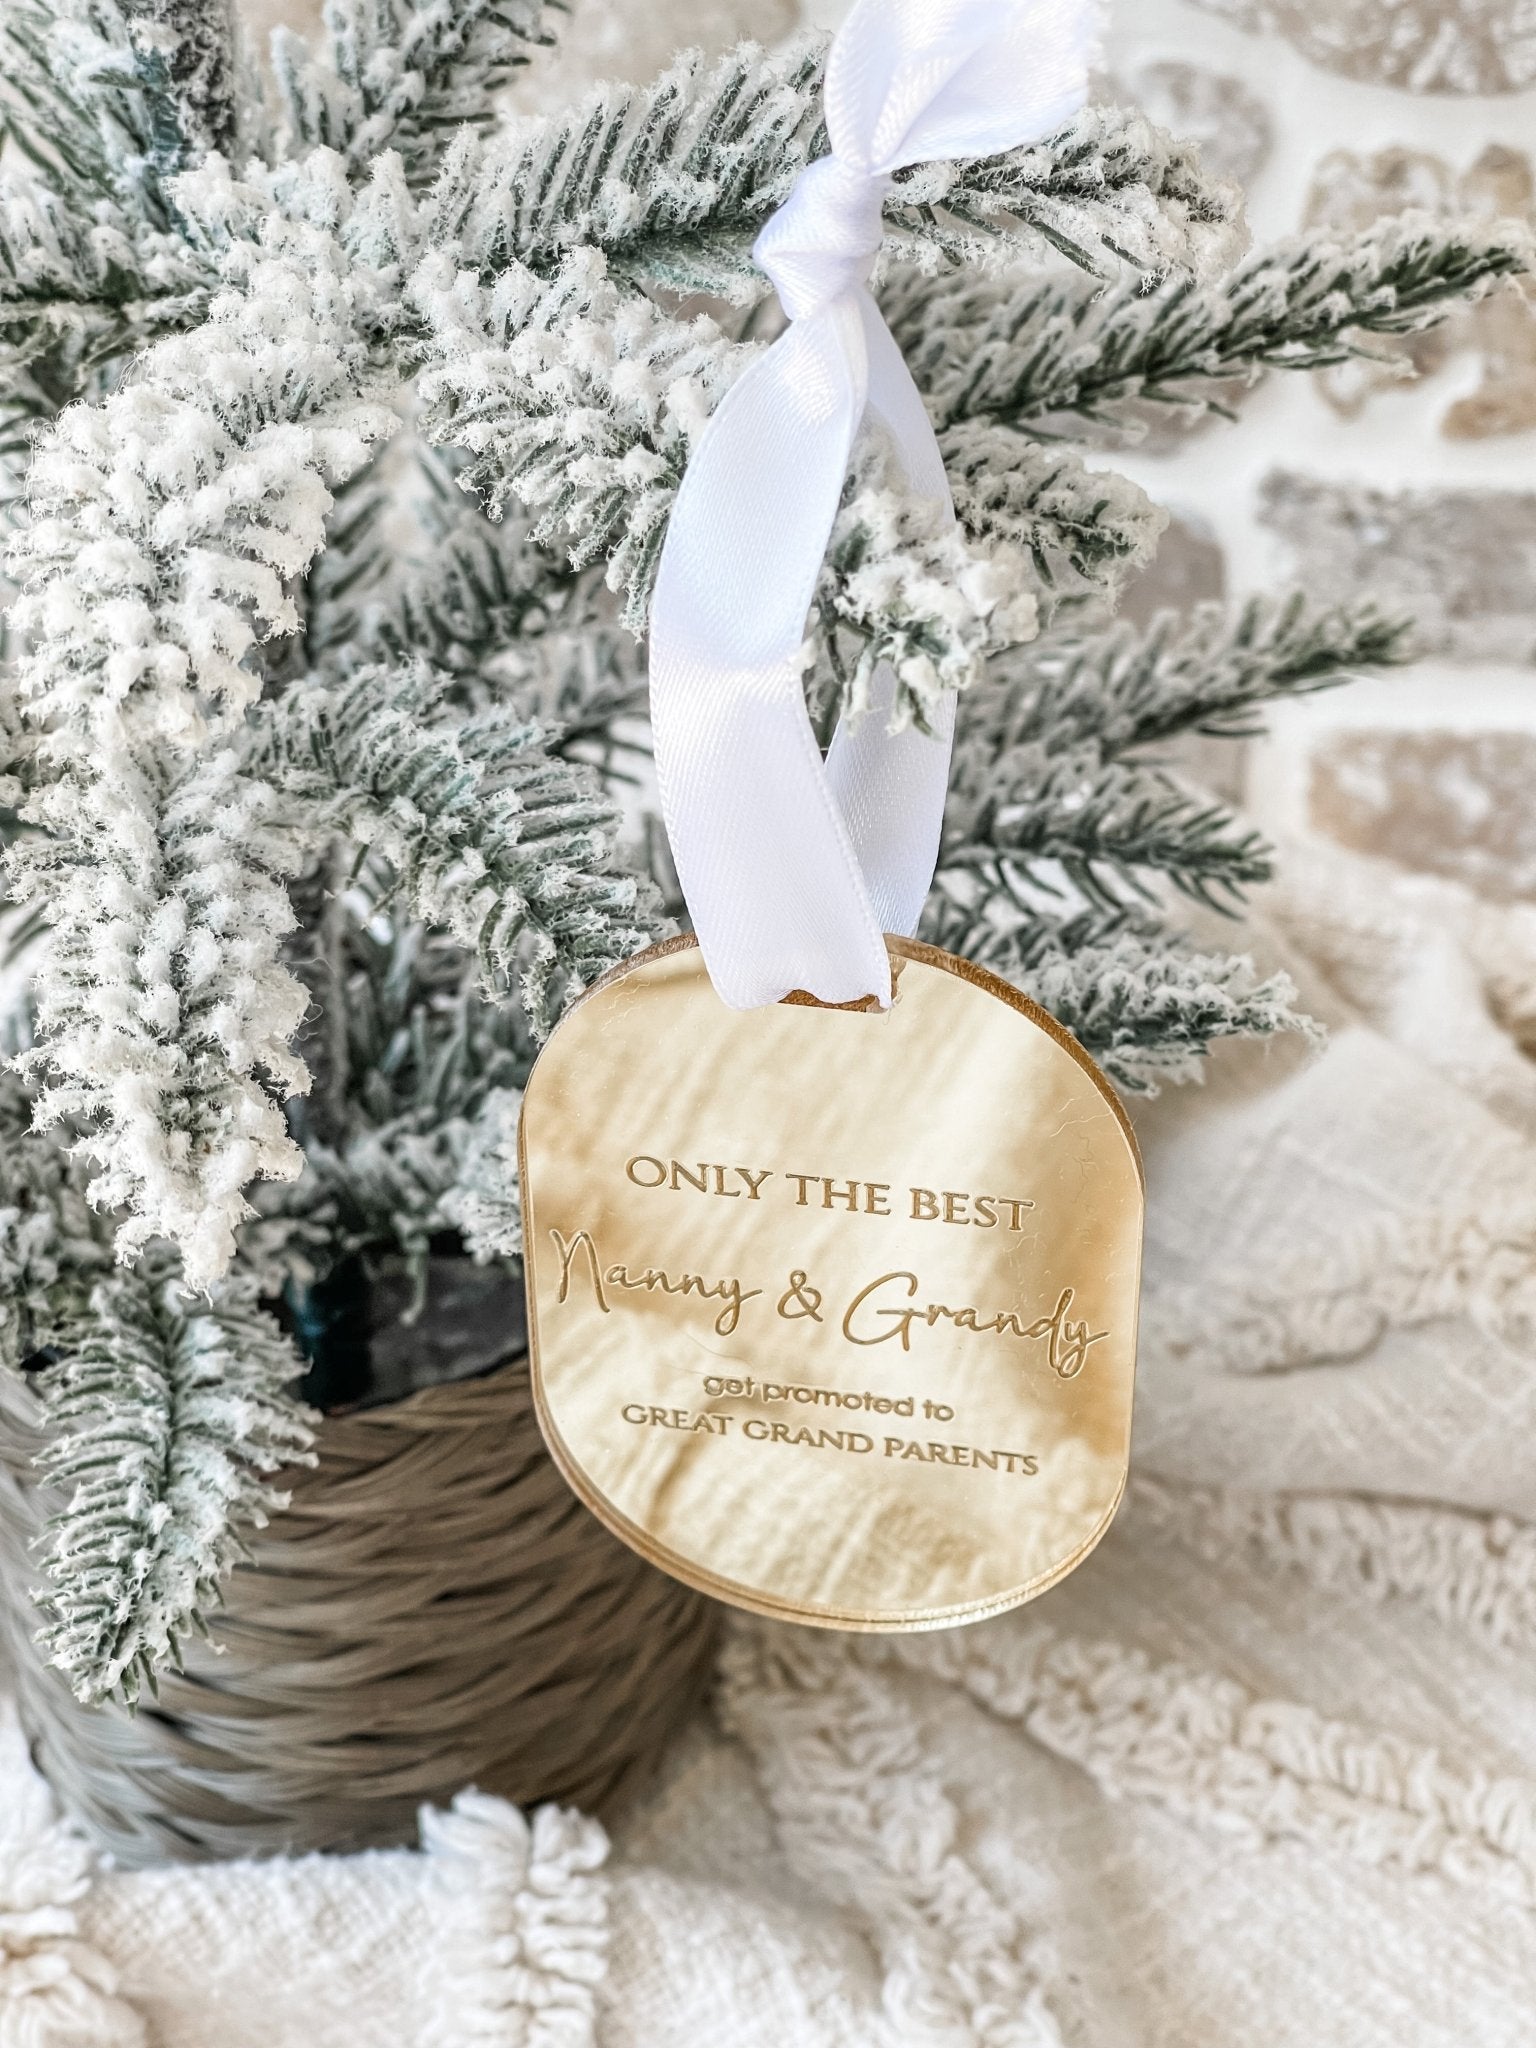 Great Grandparents Promotion Ornament - The Humble Gift Co.